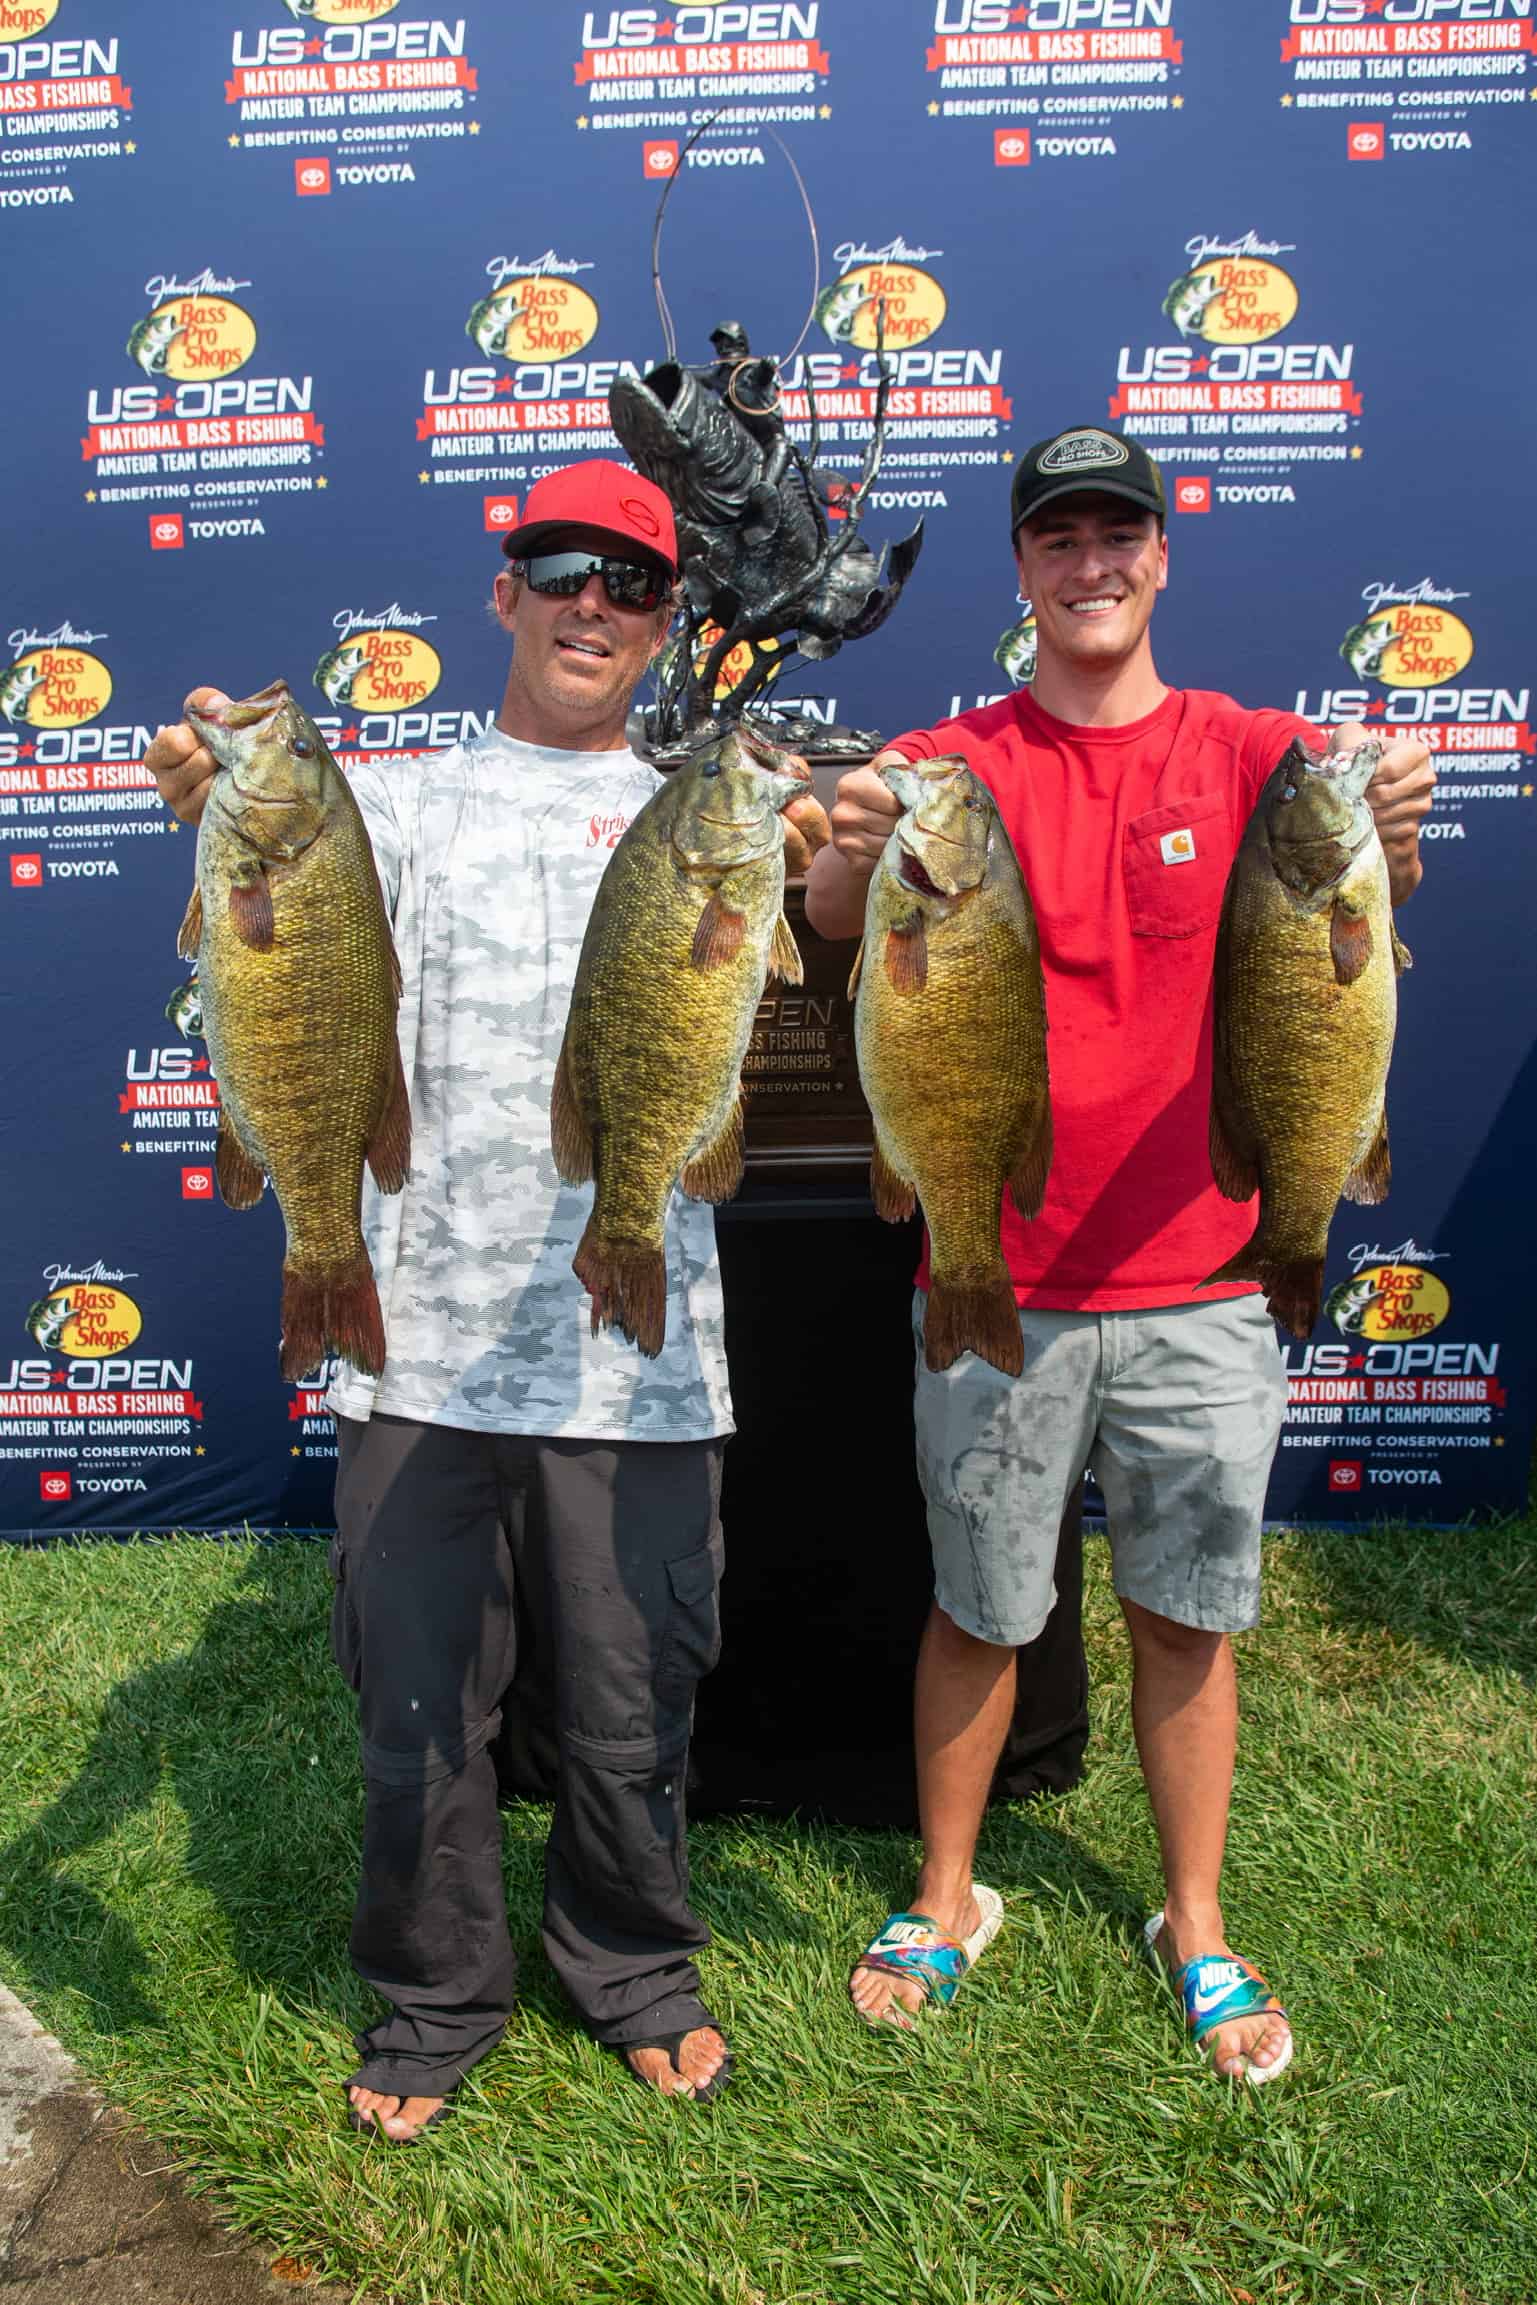 https://www.outdoorsfirst.com/bass/wp-content/uploads/sites/4/2021/08/First-Place_Weigh-In-Vande-Biezen-and-Zona.jpg